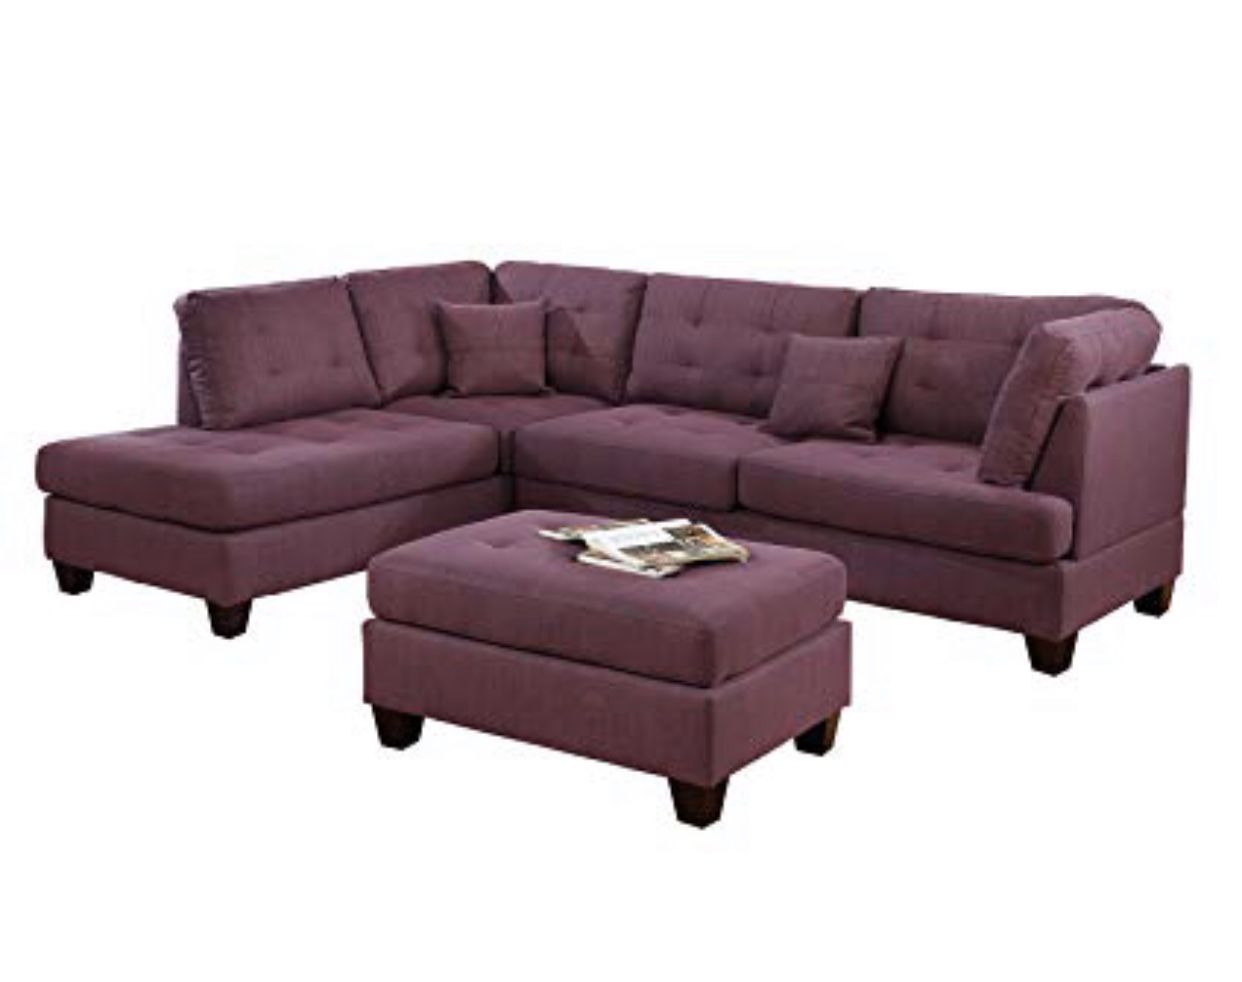 L sectional sofa chaise living room set with ottoman sale (finance available)